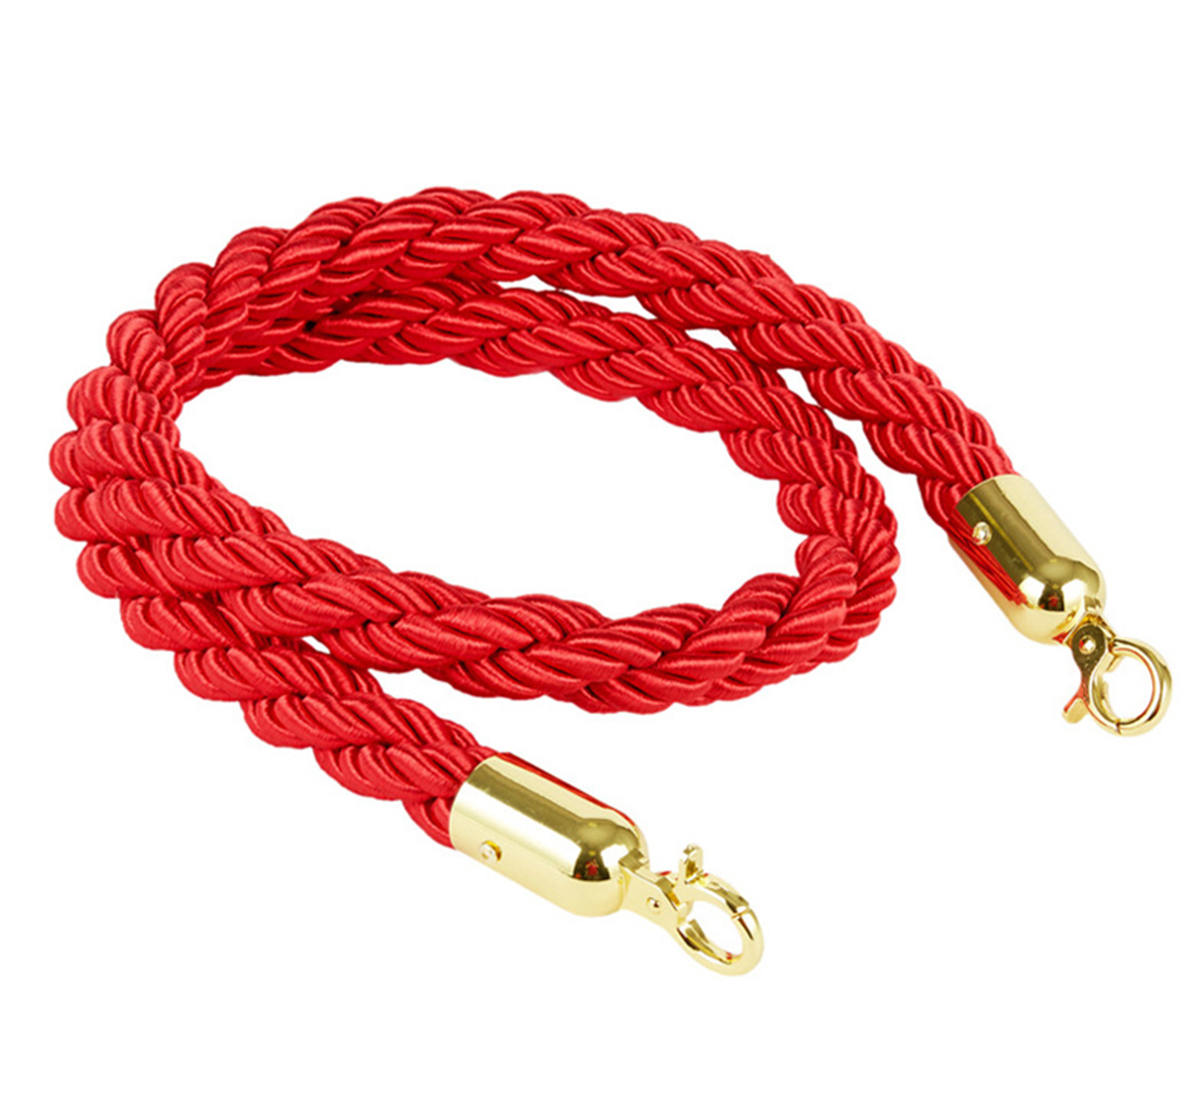 Red nylon twisted queue manager rope